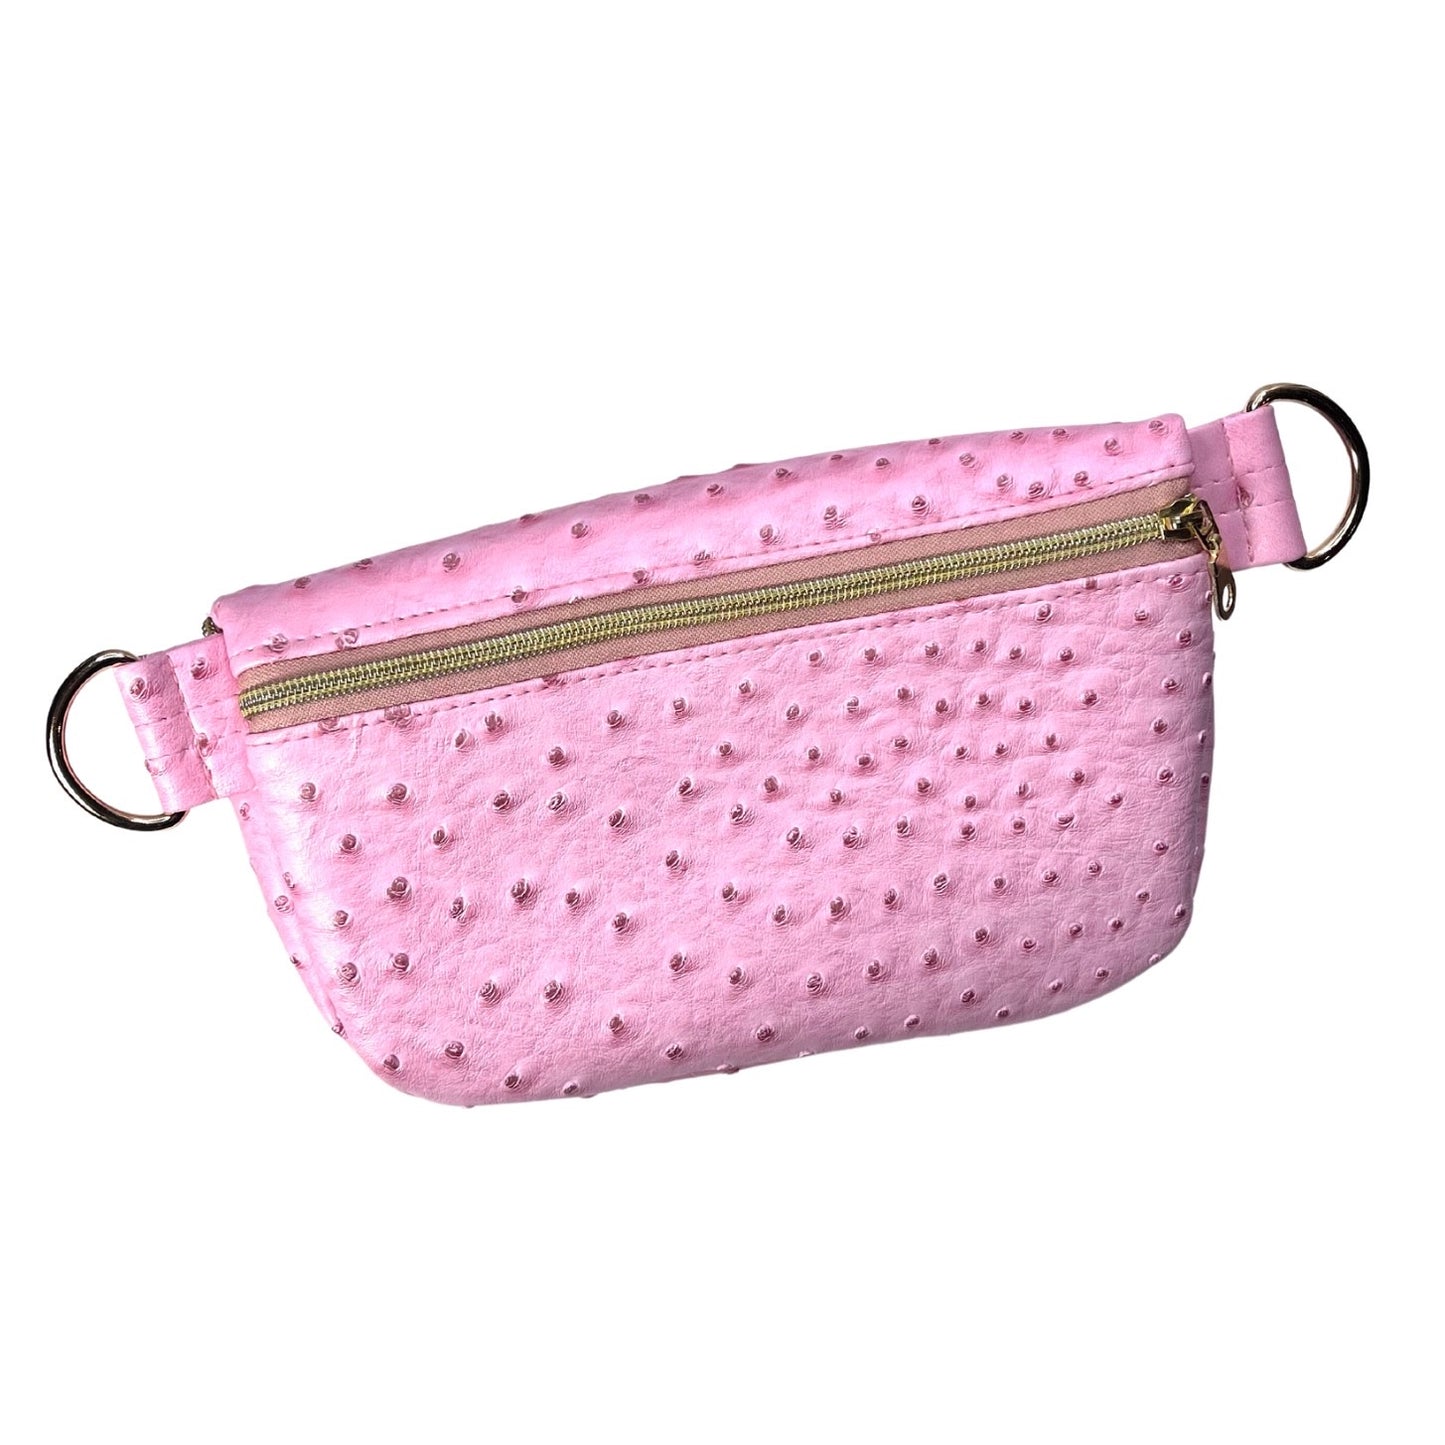 Sidekick Bag - Baby Blush Ostrich (Comes with a basic blush strap. Please check out our selection of additional decorative straps for purchase.)